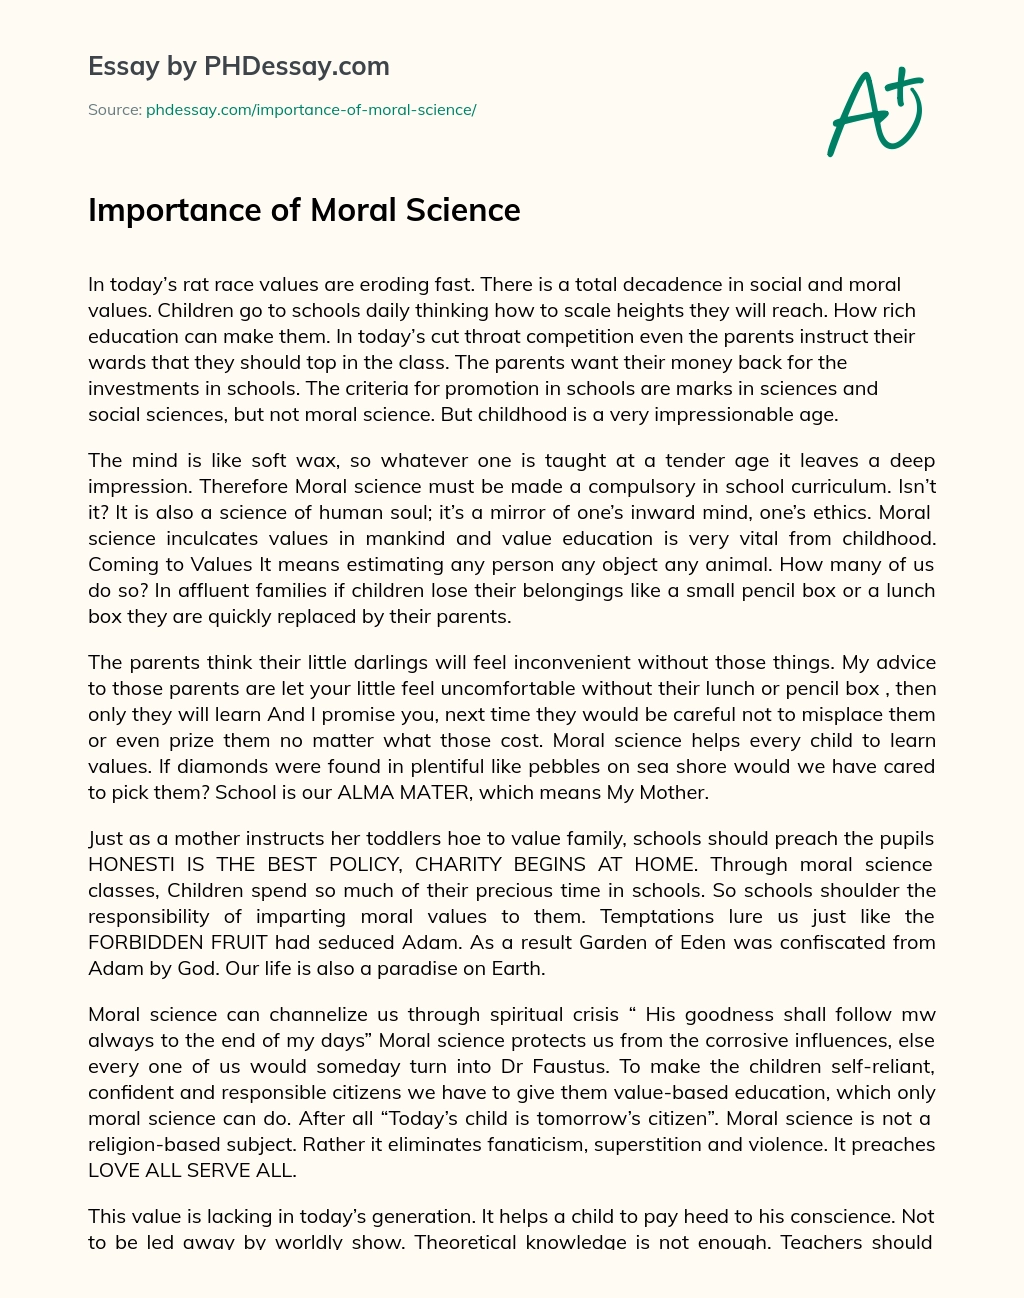 Importance of Moral Science essay